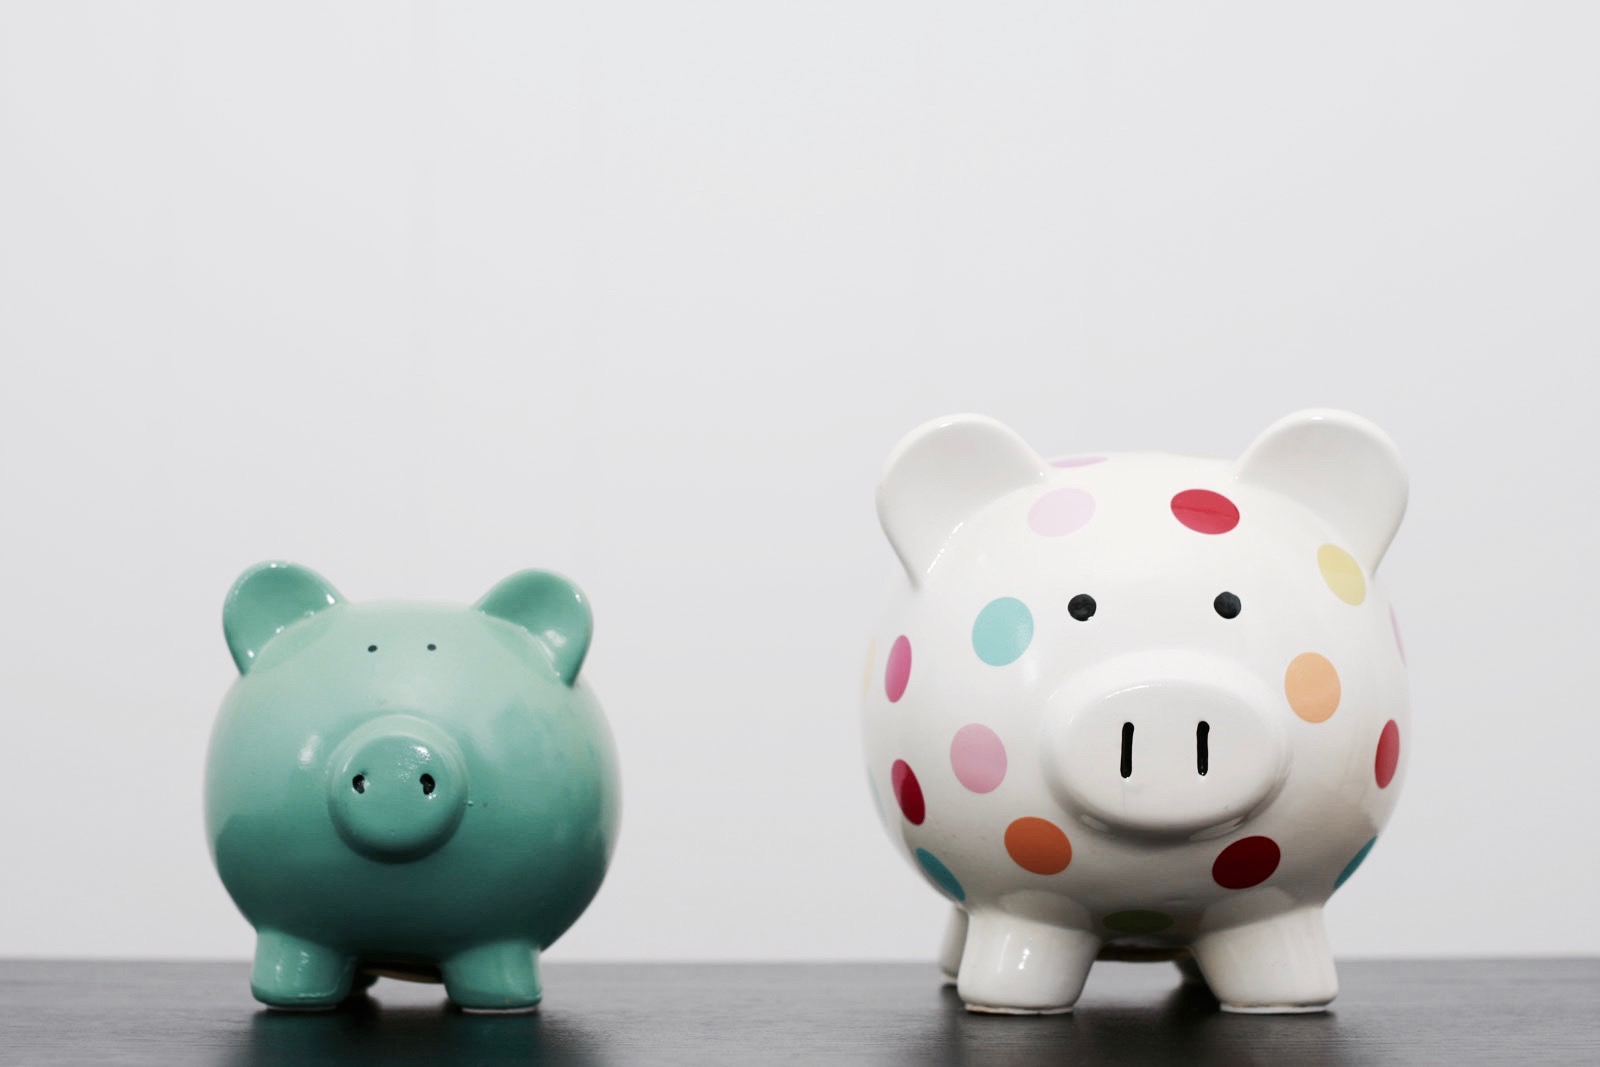 two piggy banks: A polka dot one and a green one